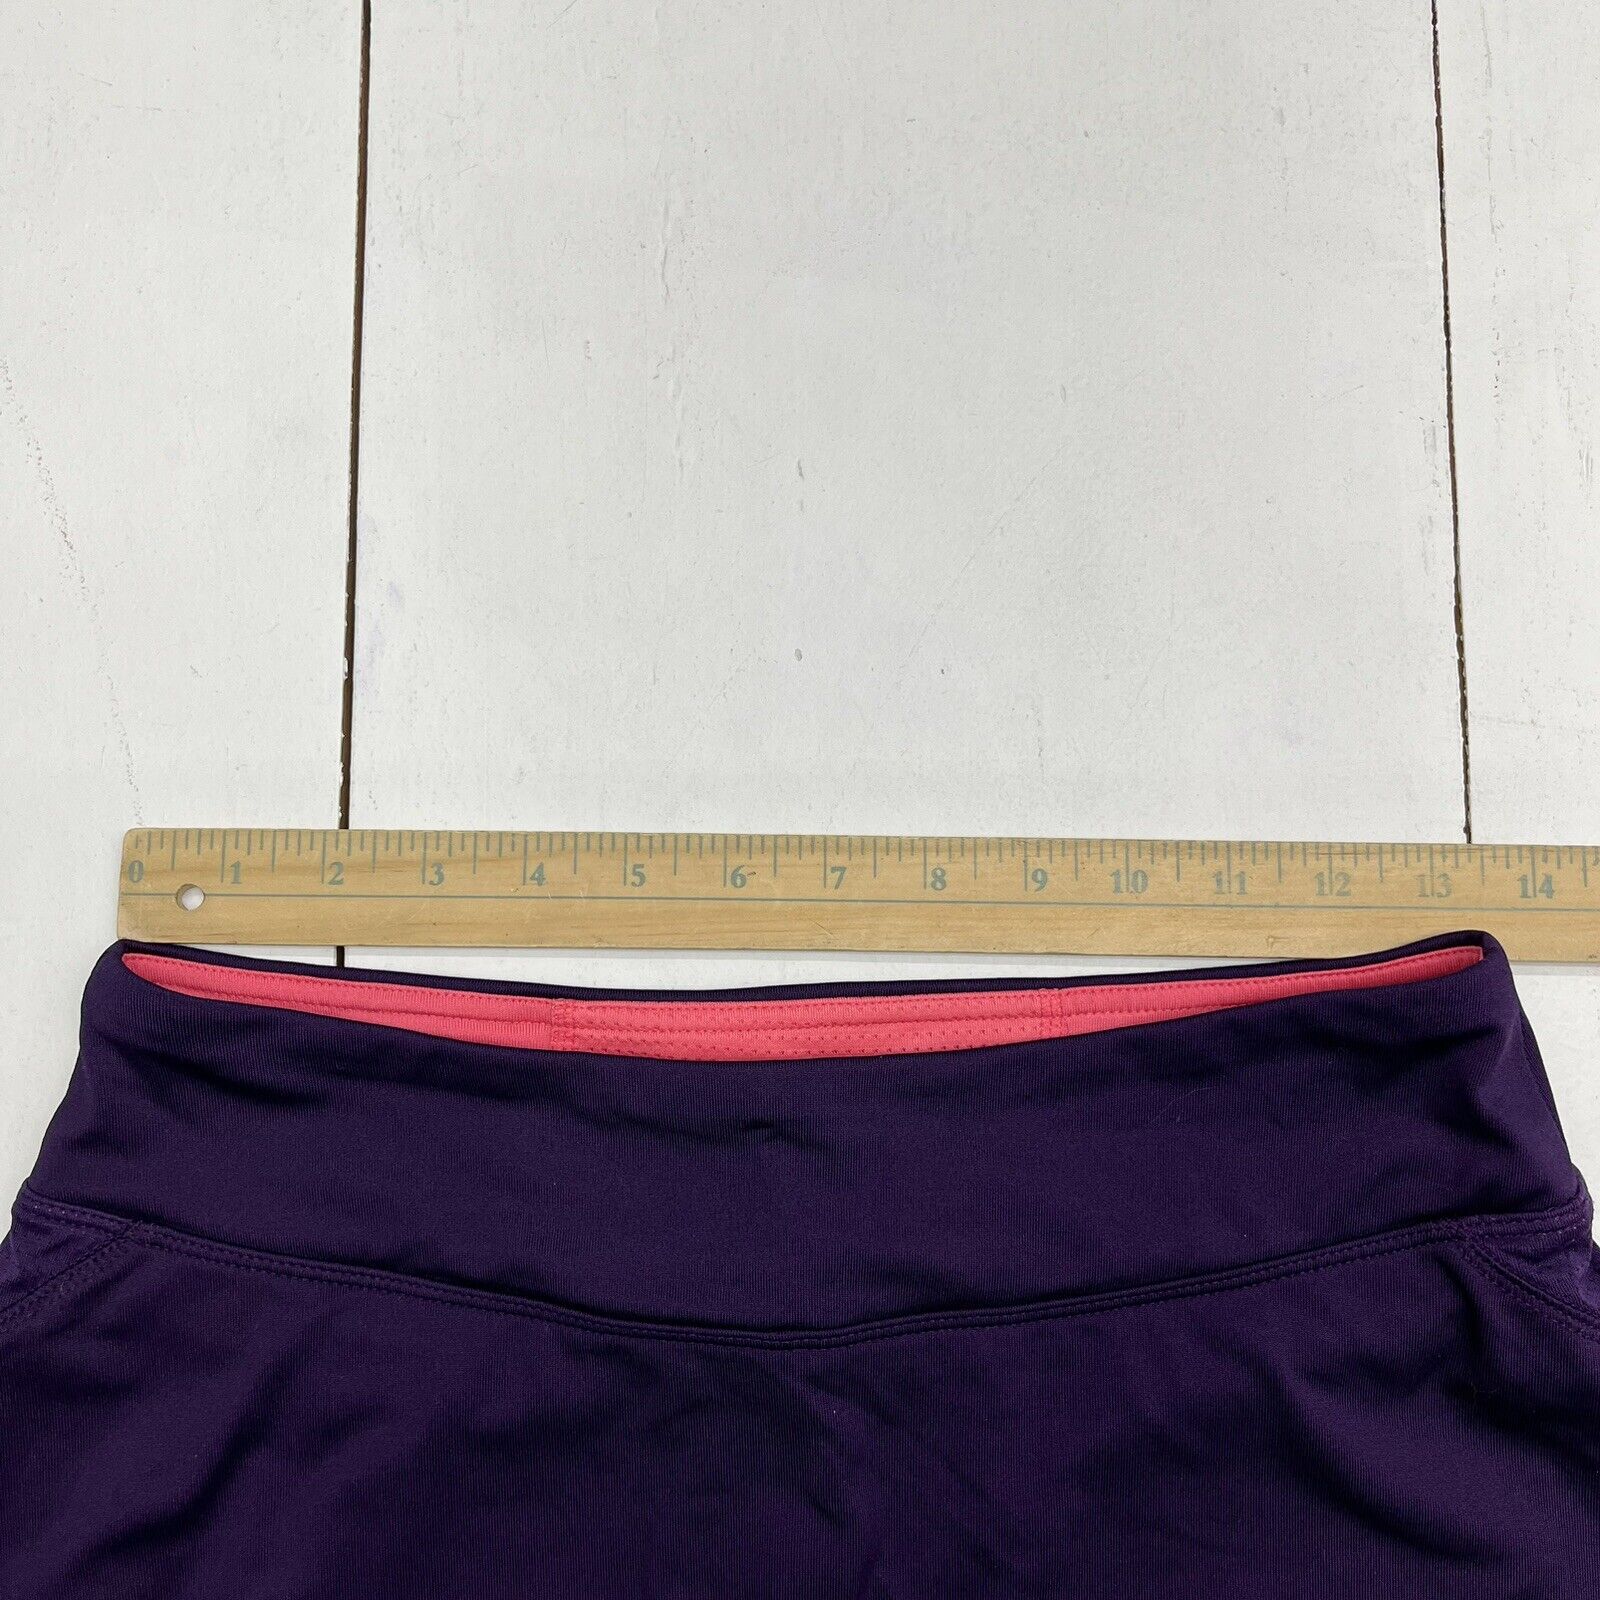 Champion C9 by Women's Red Workout Leggings Size S - $15 - From